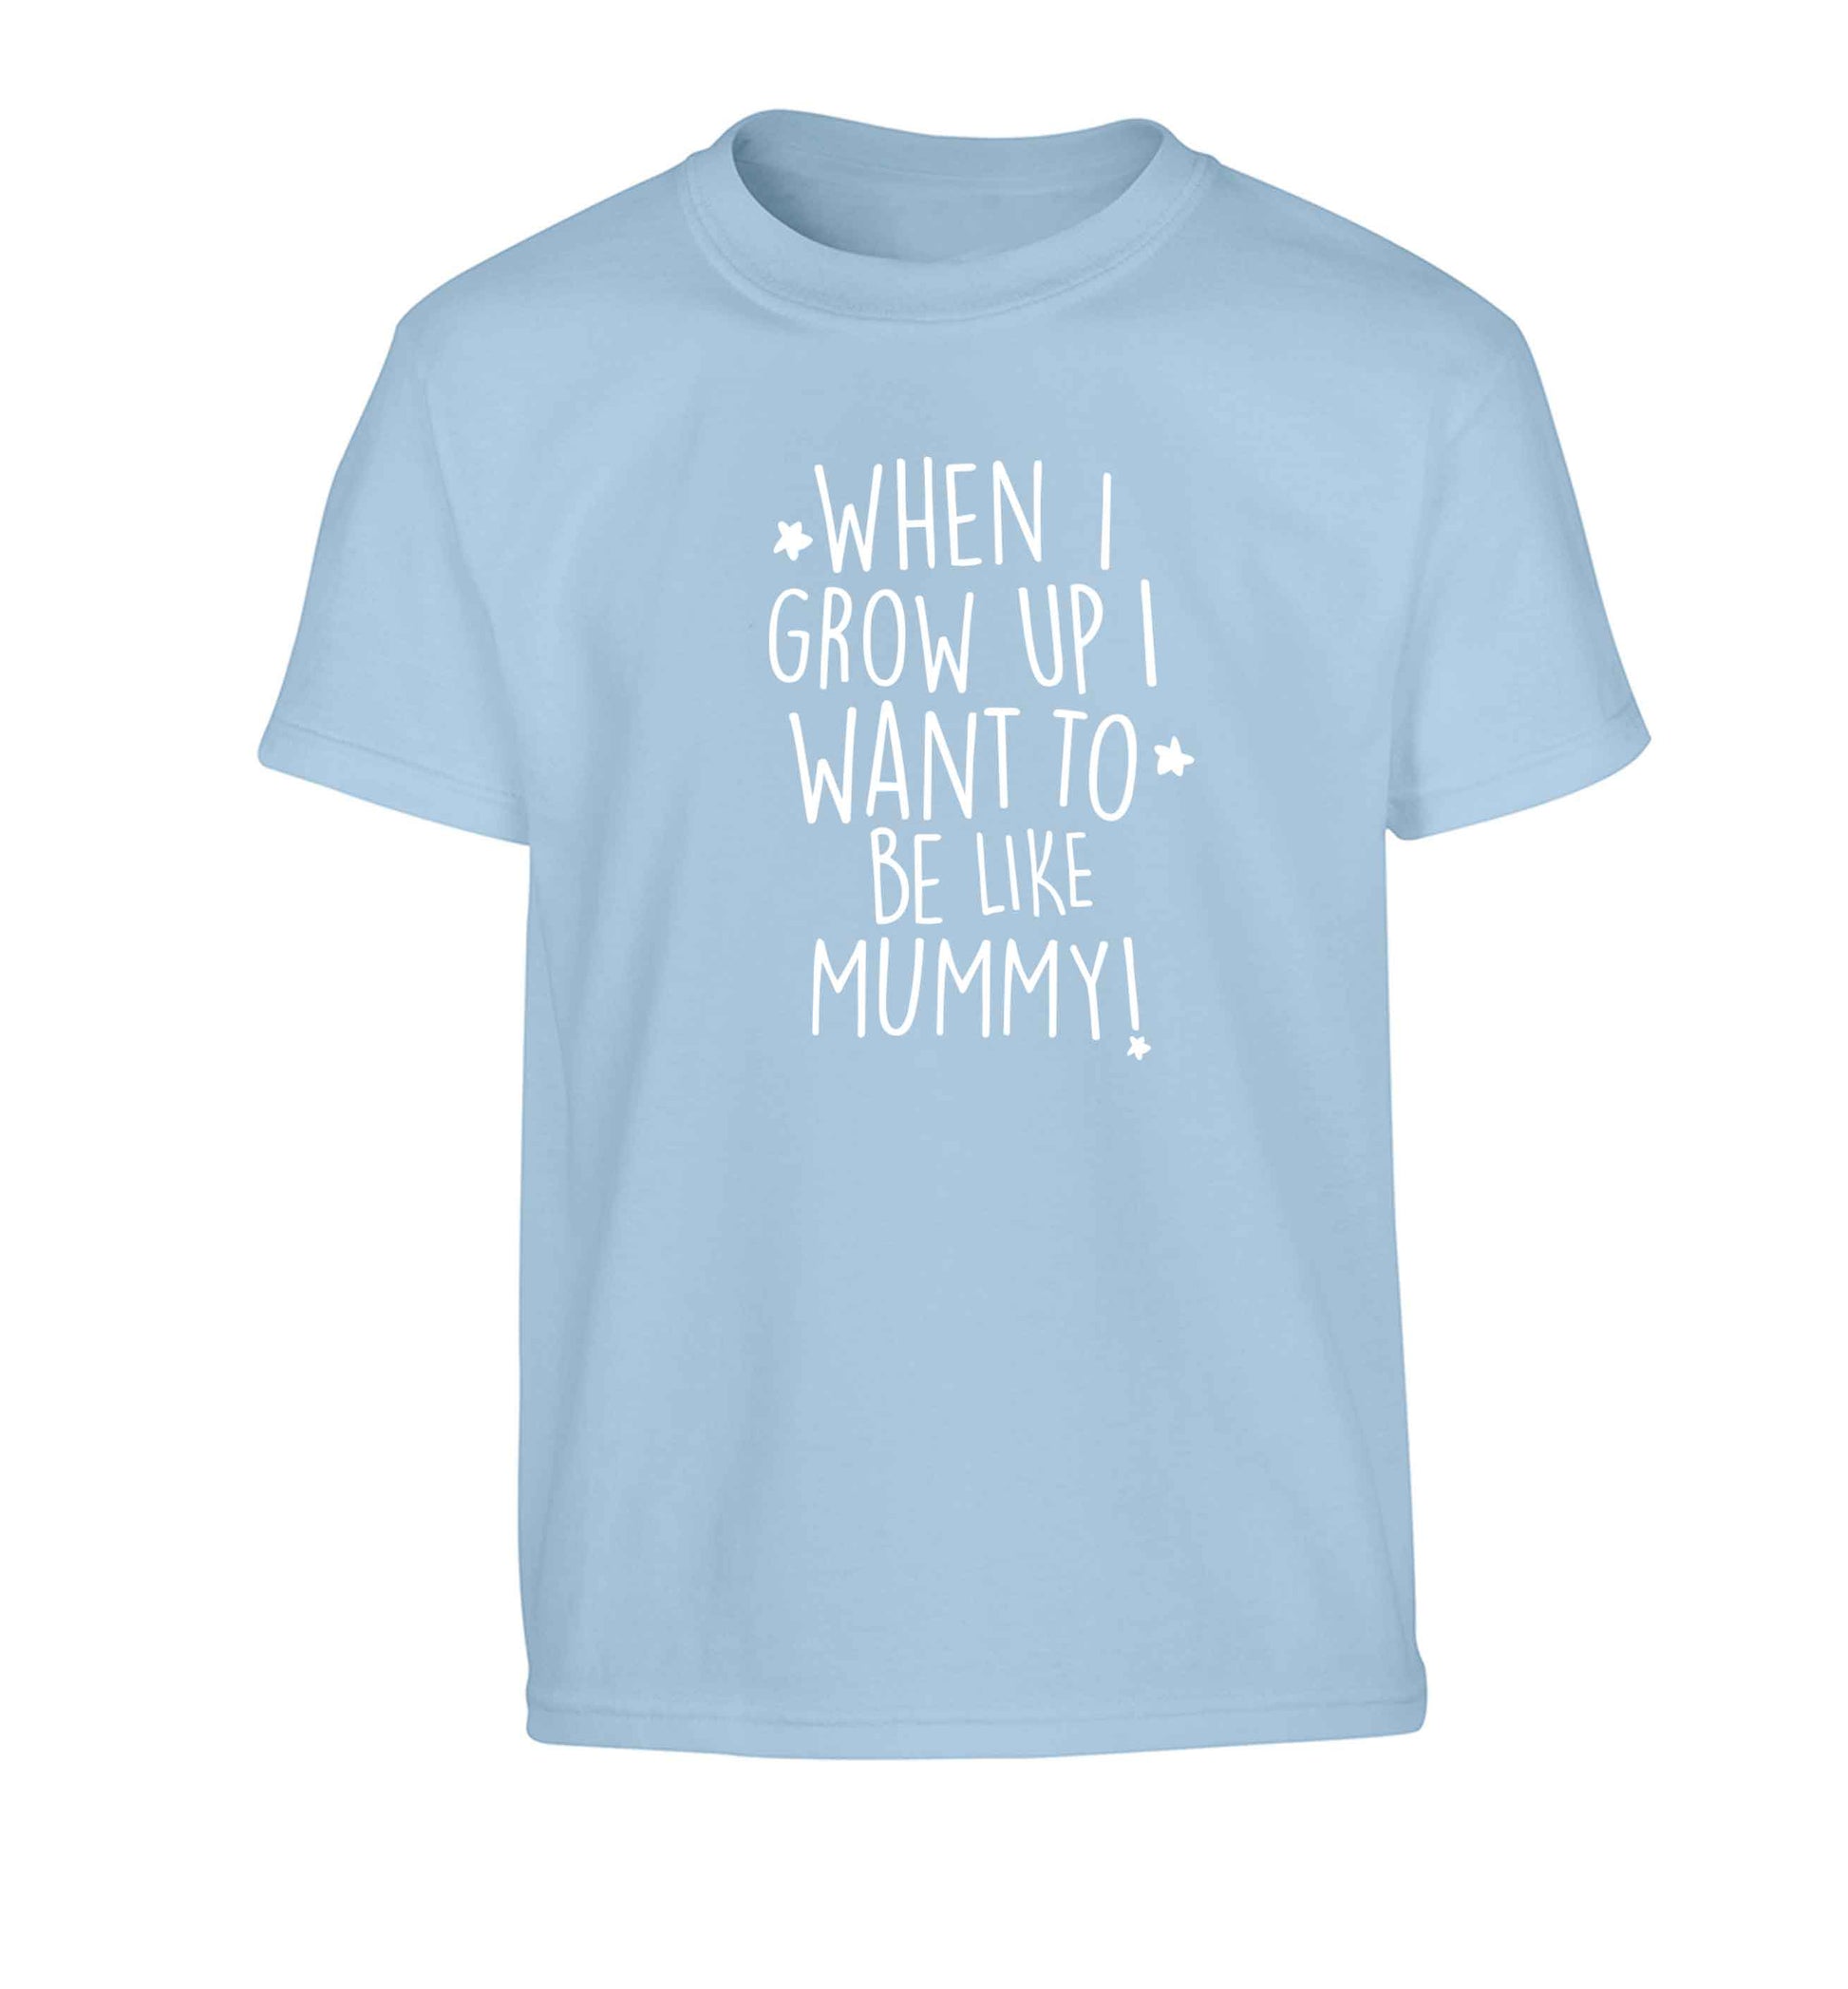 When I grow up I want to be like my mummy Children's light blue Tshirt 12-13 Years